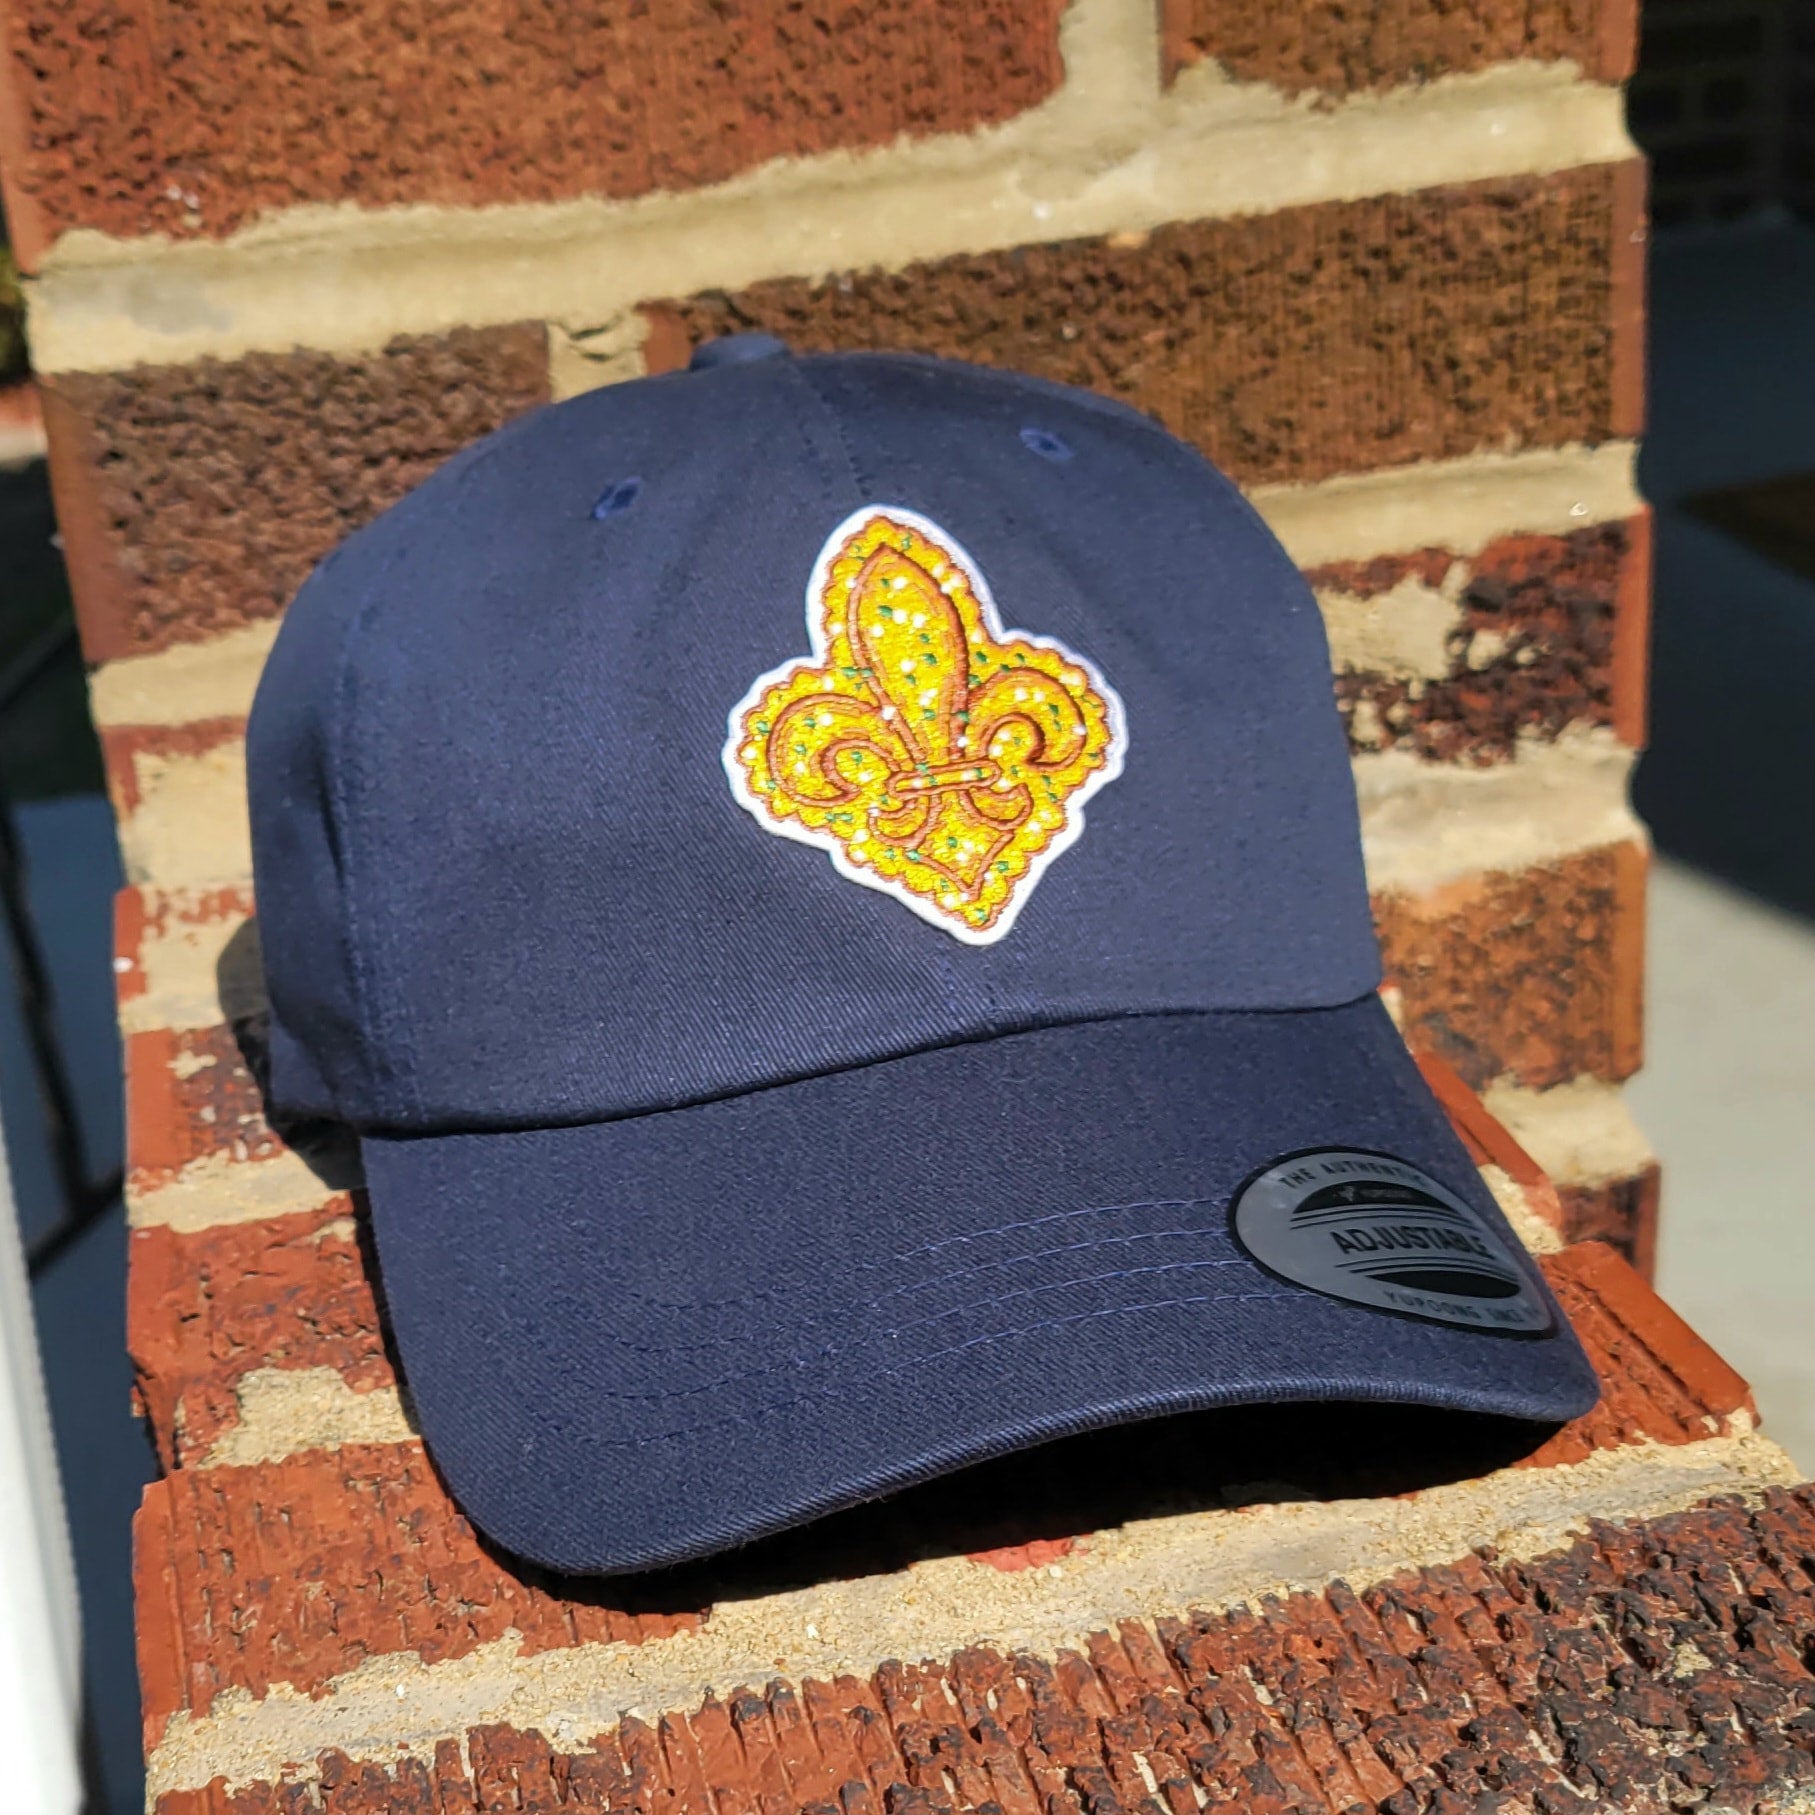 New Cardinals hat features toasted ravioli, Gateway Arch